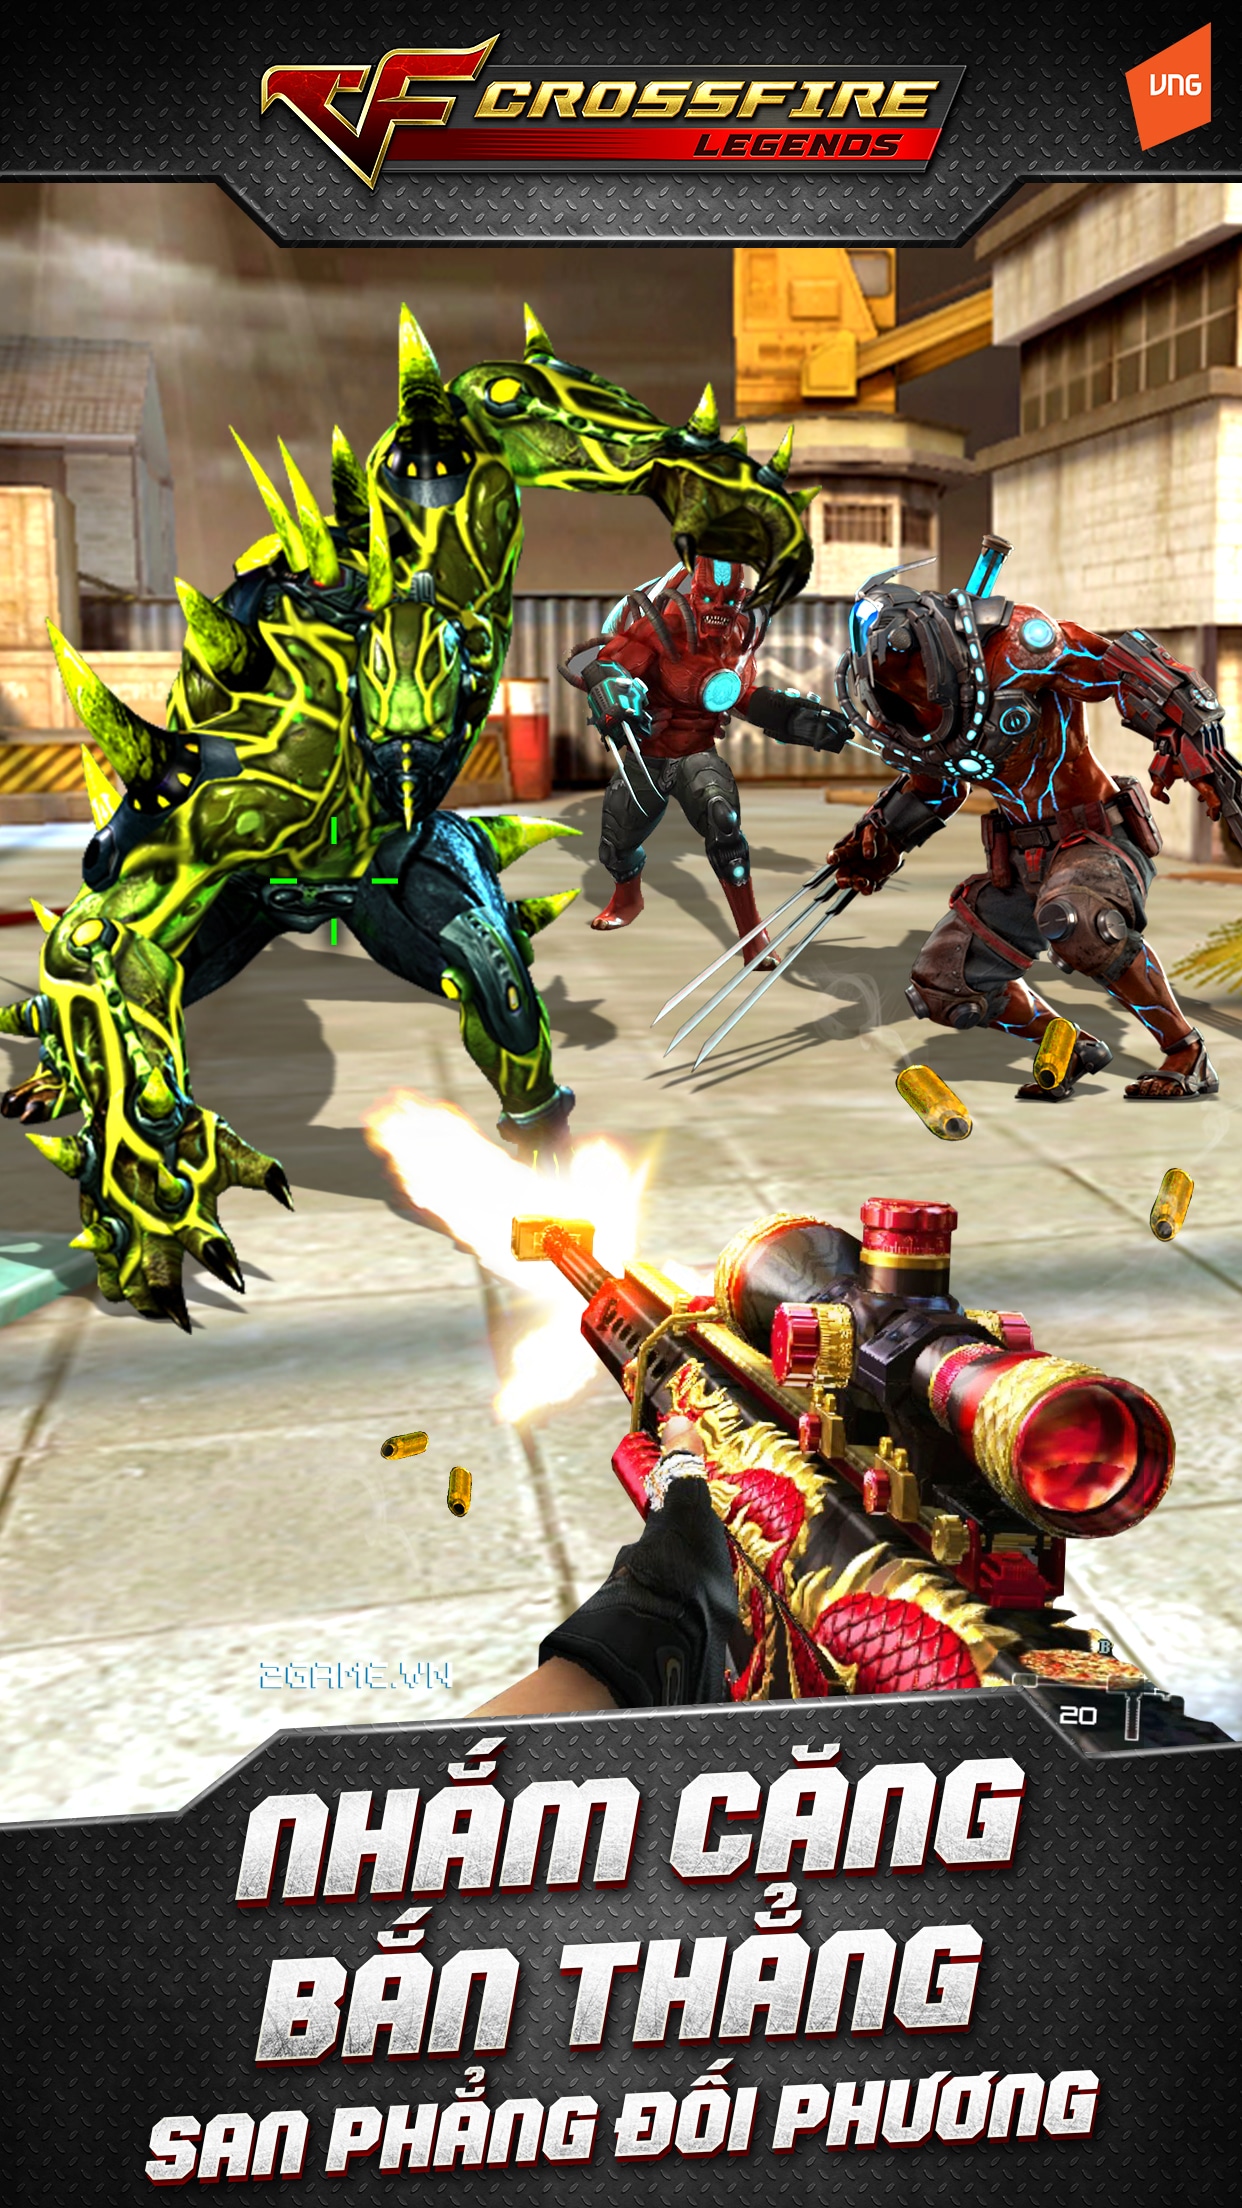 2game-anh-crossfire-legends-mobile-hd-2s.jpg (1242×2208)